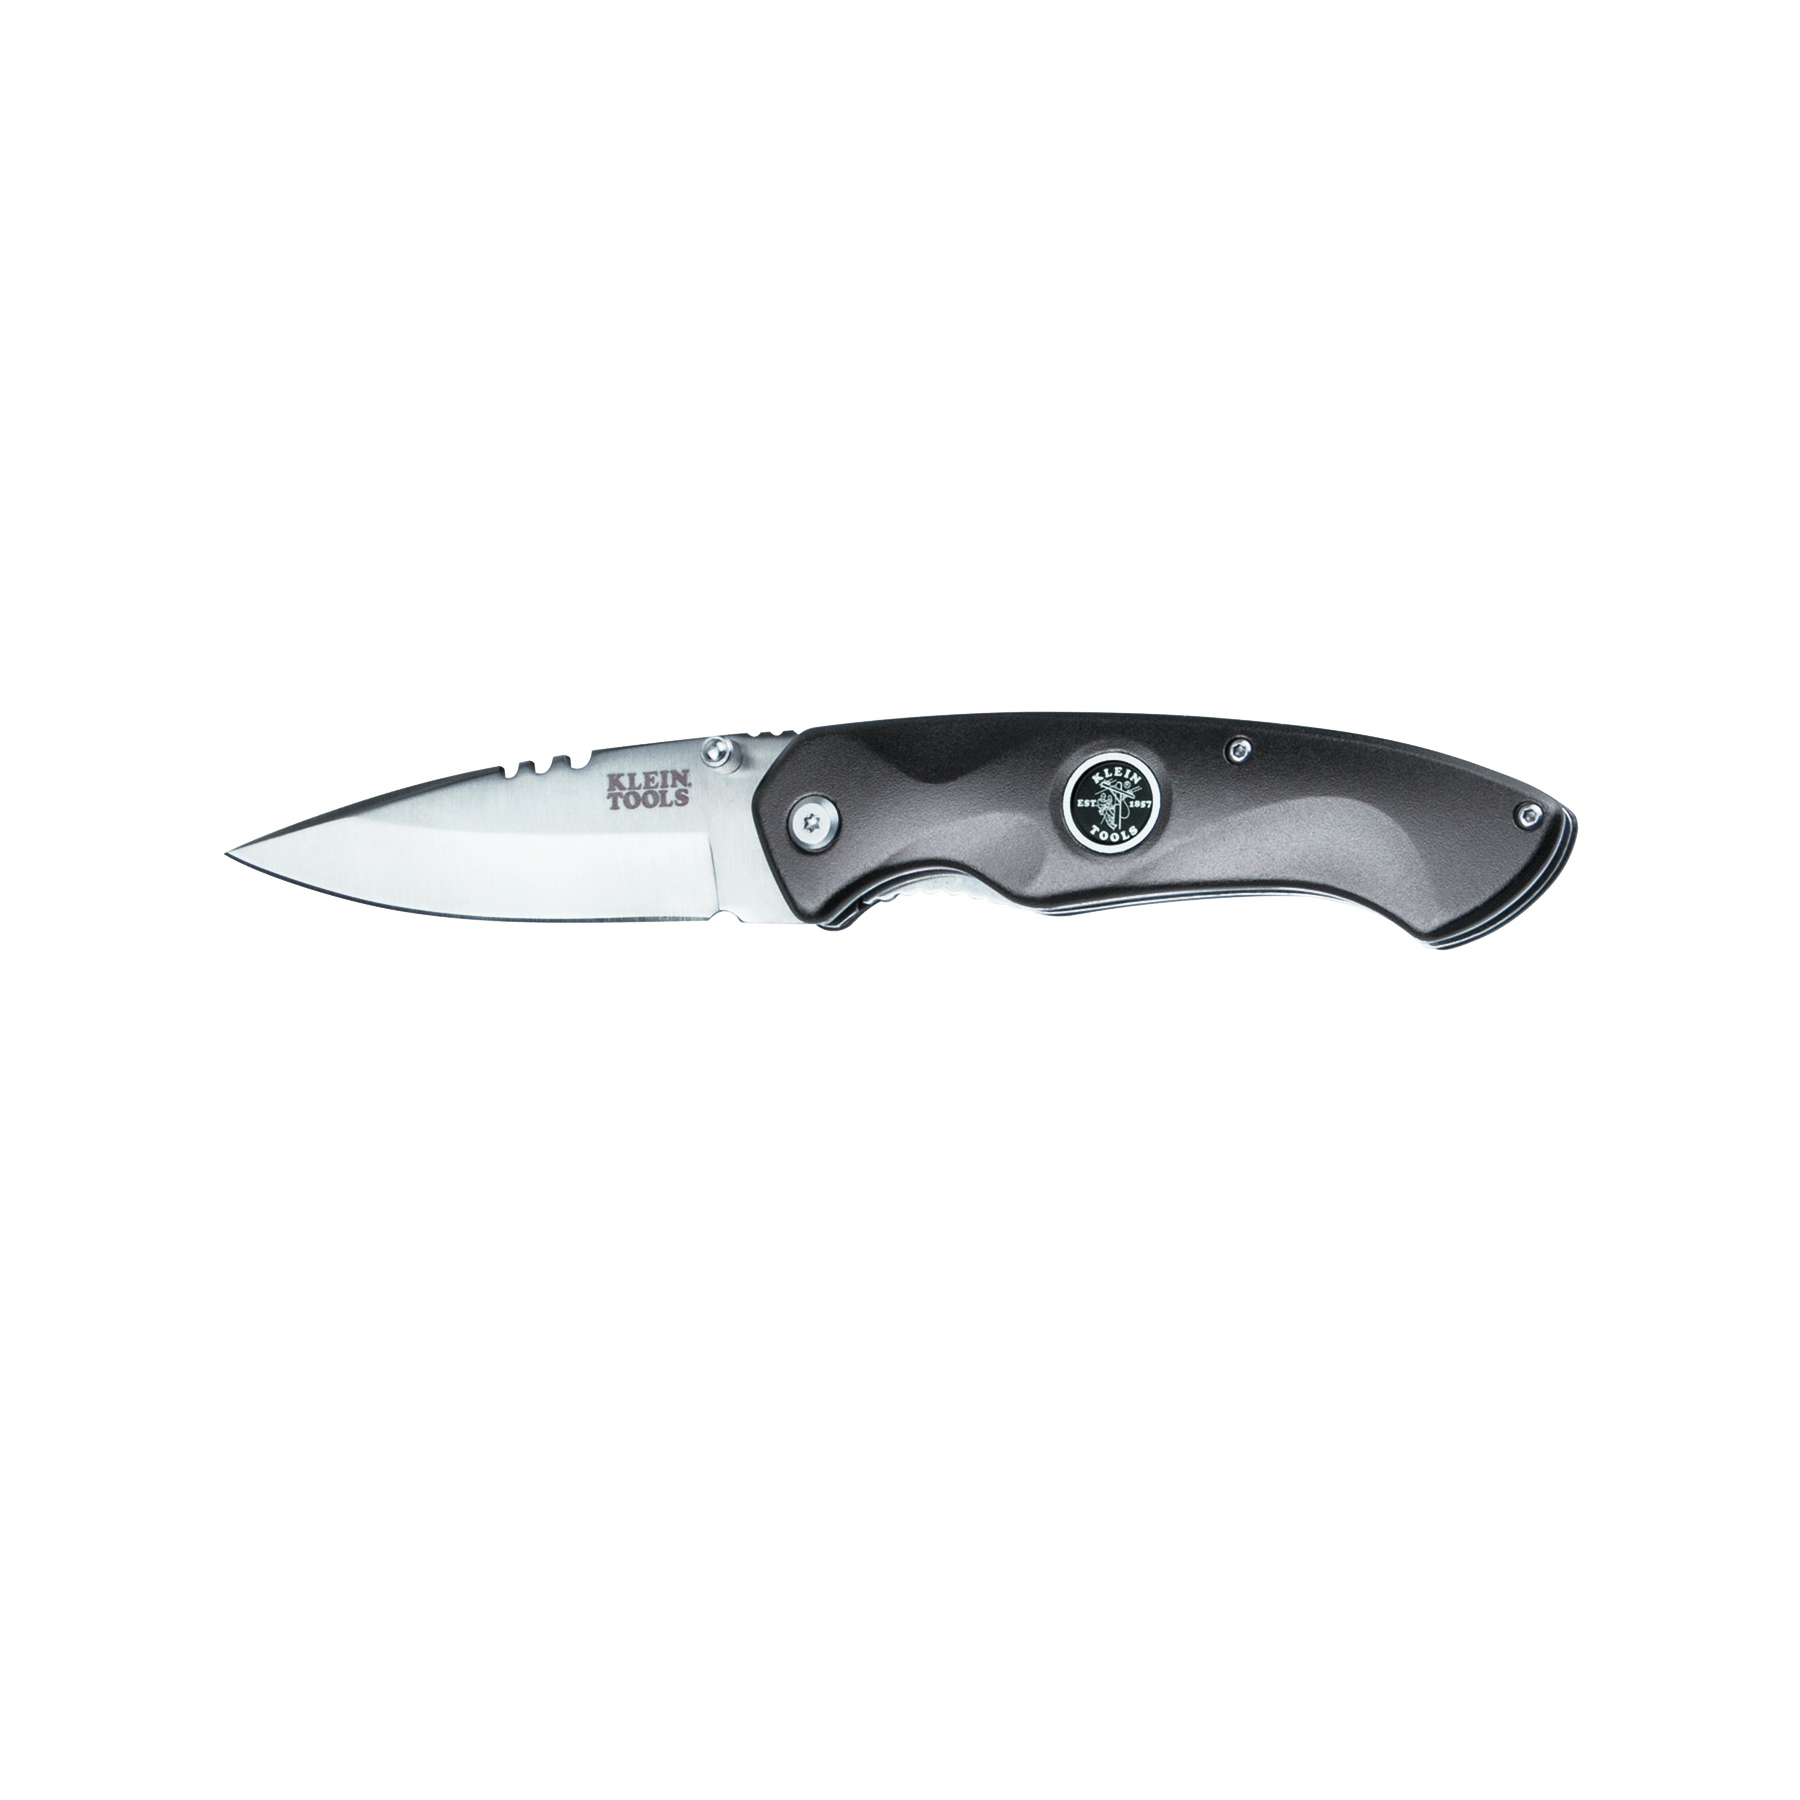 Klein® 44201 Electrician Pocket Knife, Drop Point Blade, 3-3/8 in L Blade, 440A Stainless Steel Blade, Gray Handle